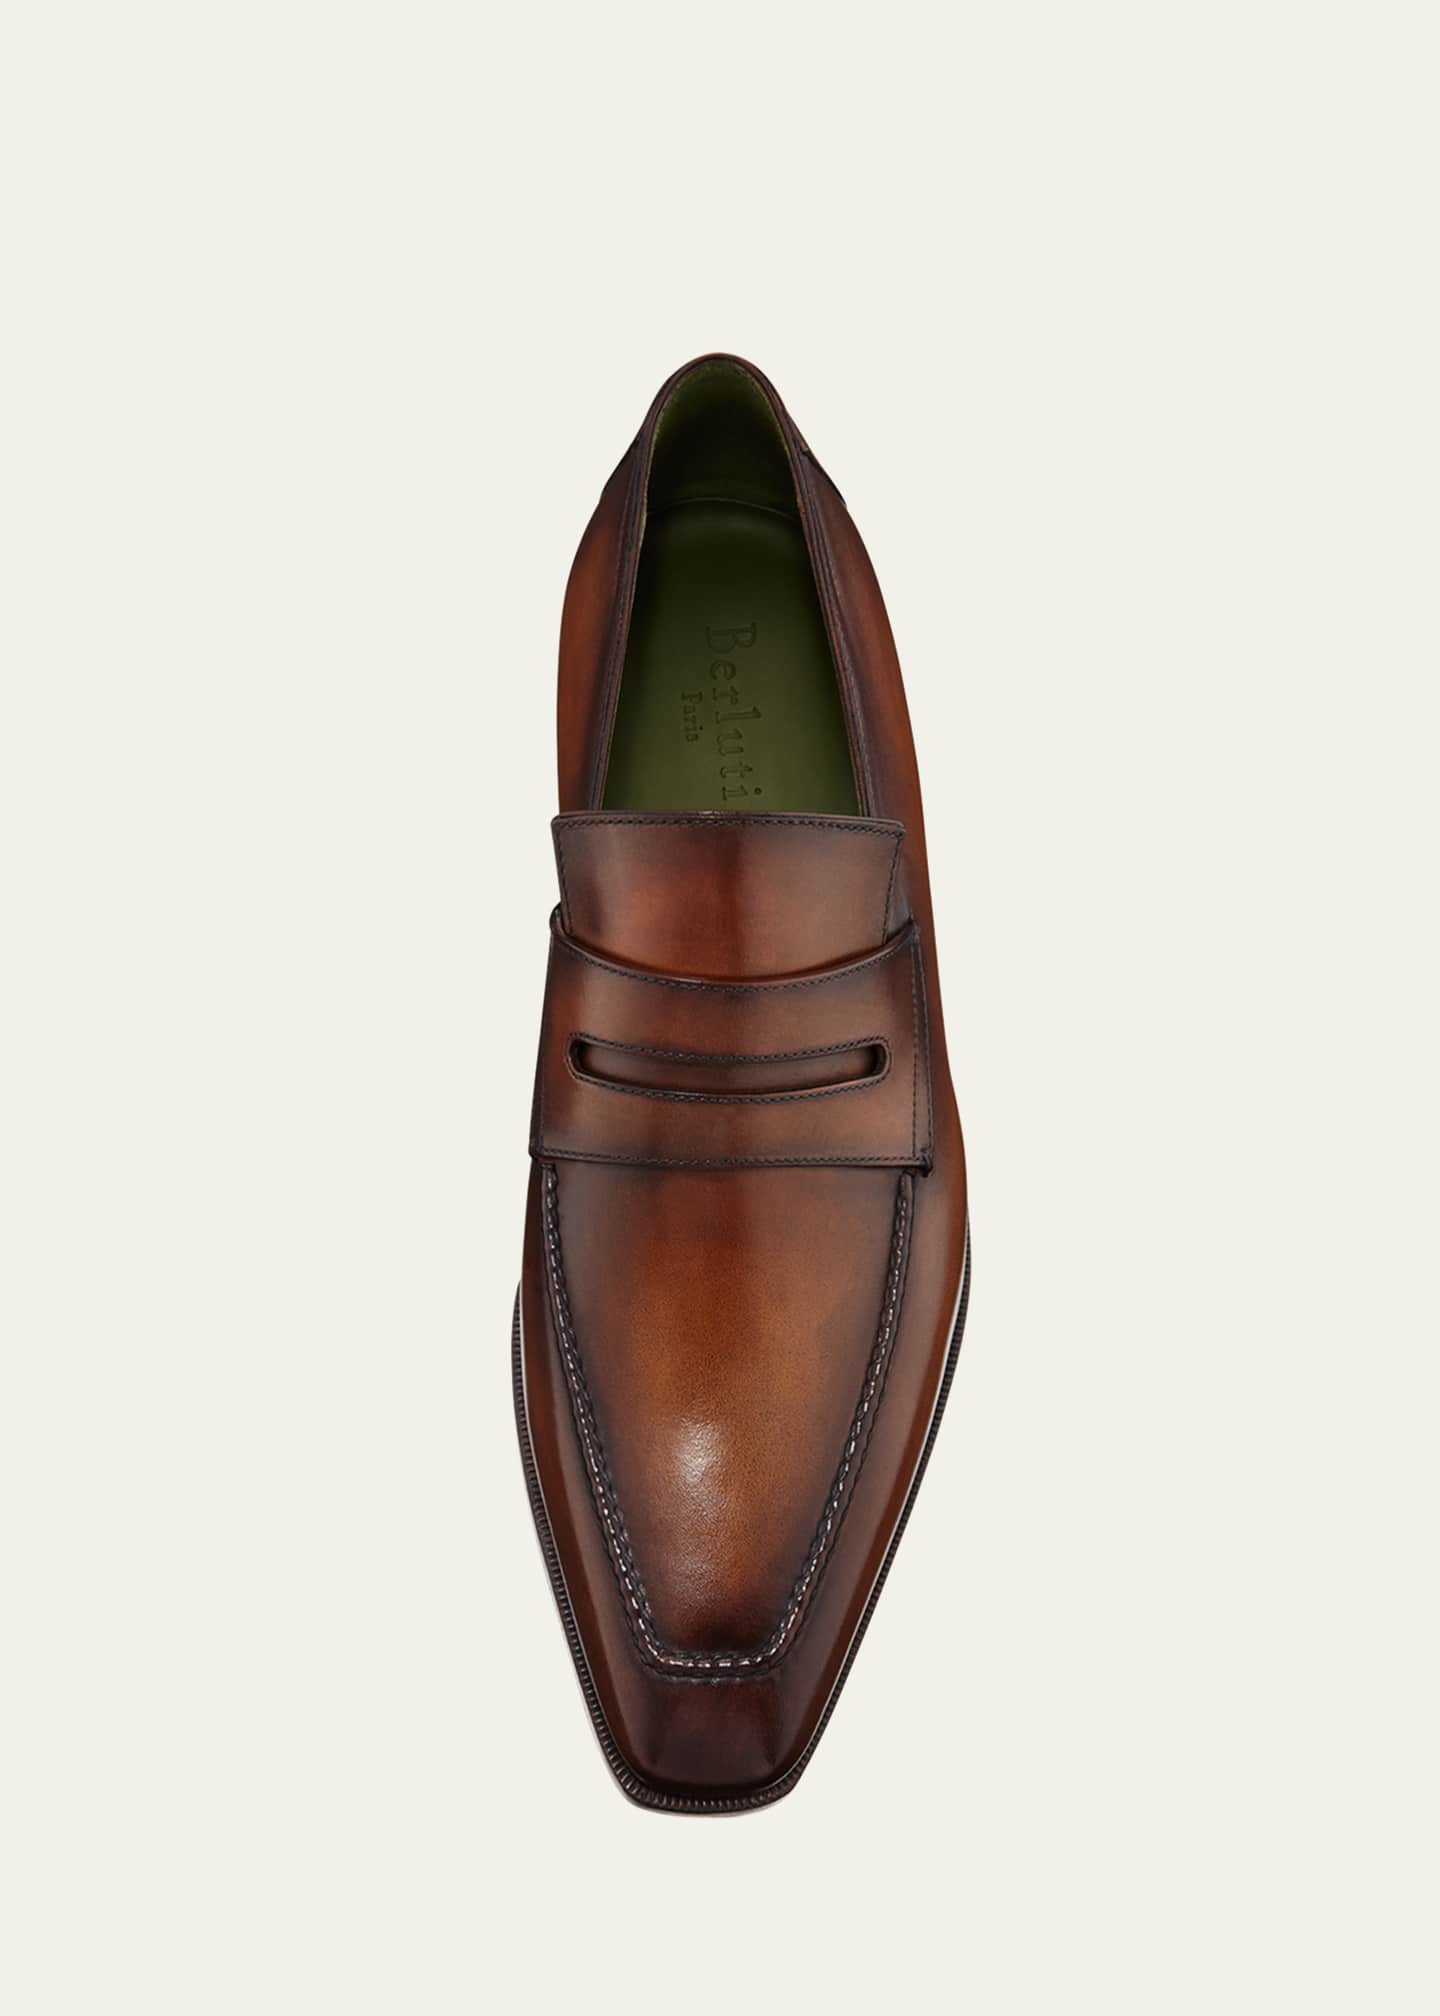 Berluti Men's Andy Leather Penny Loafers - Bergdorf Goodman